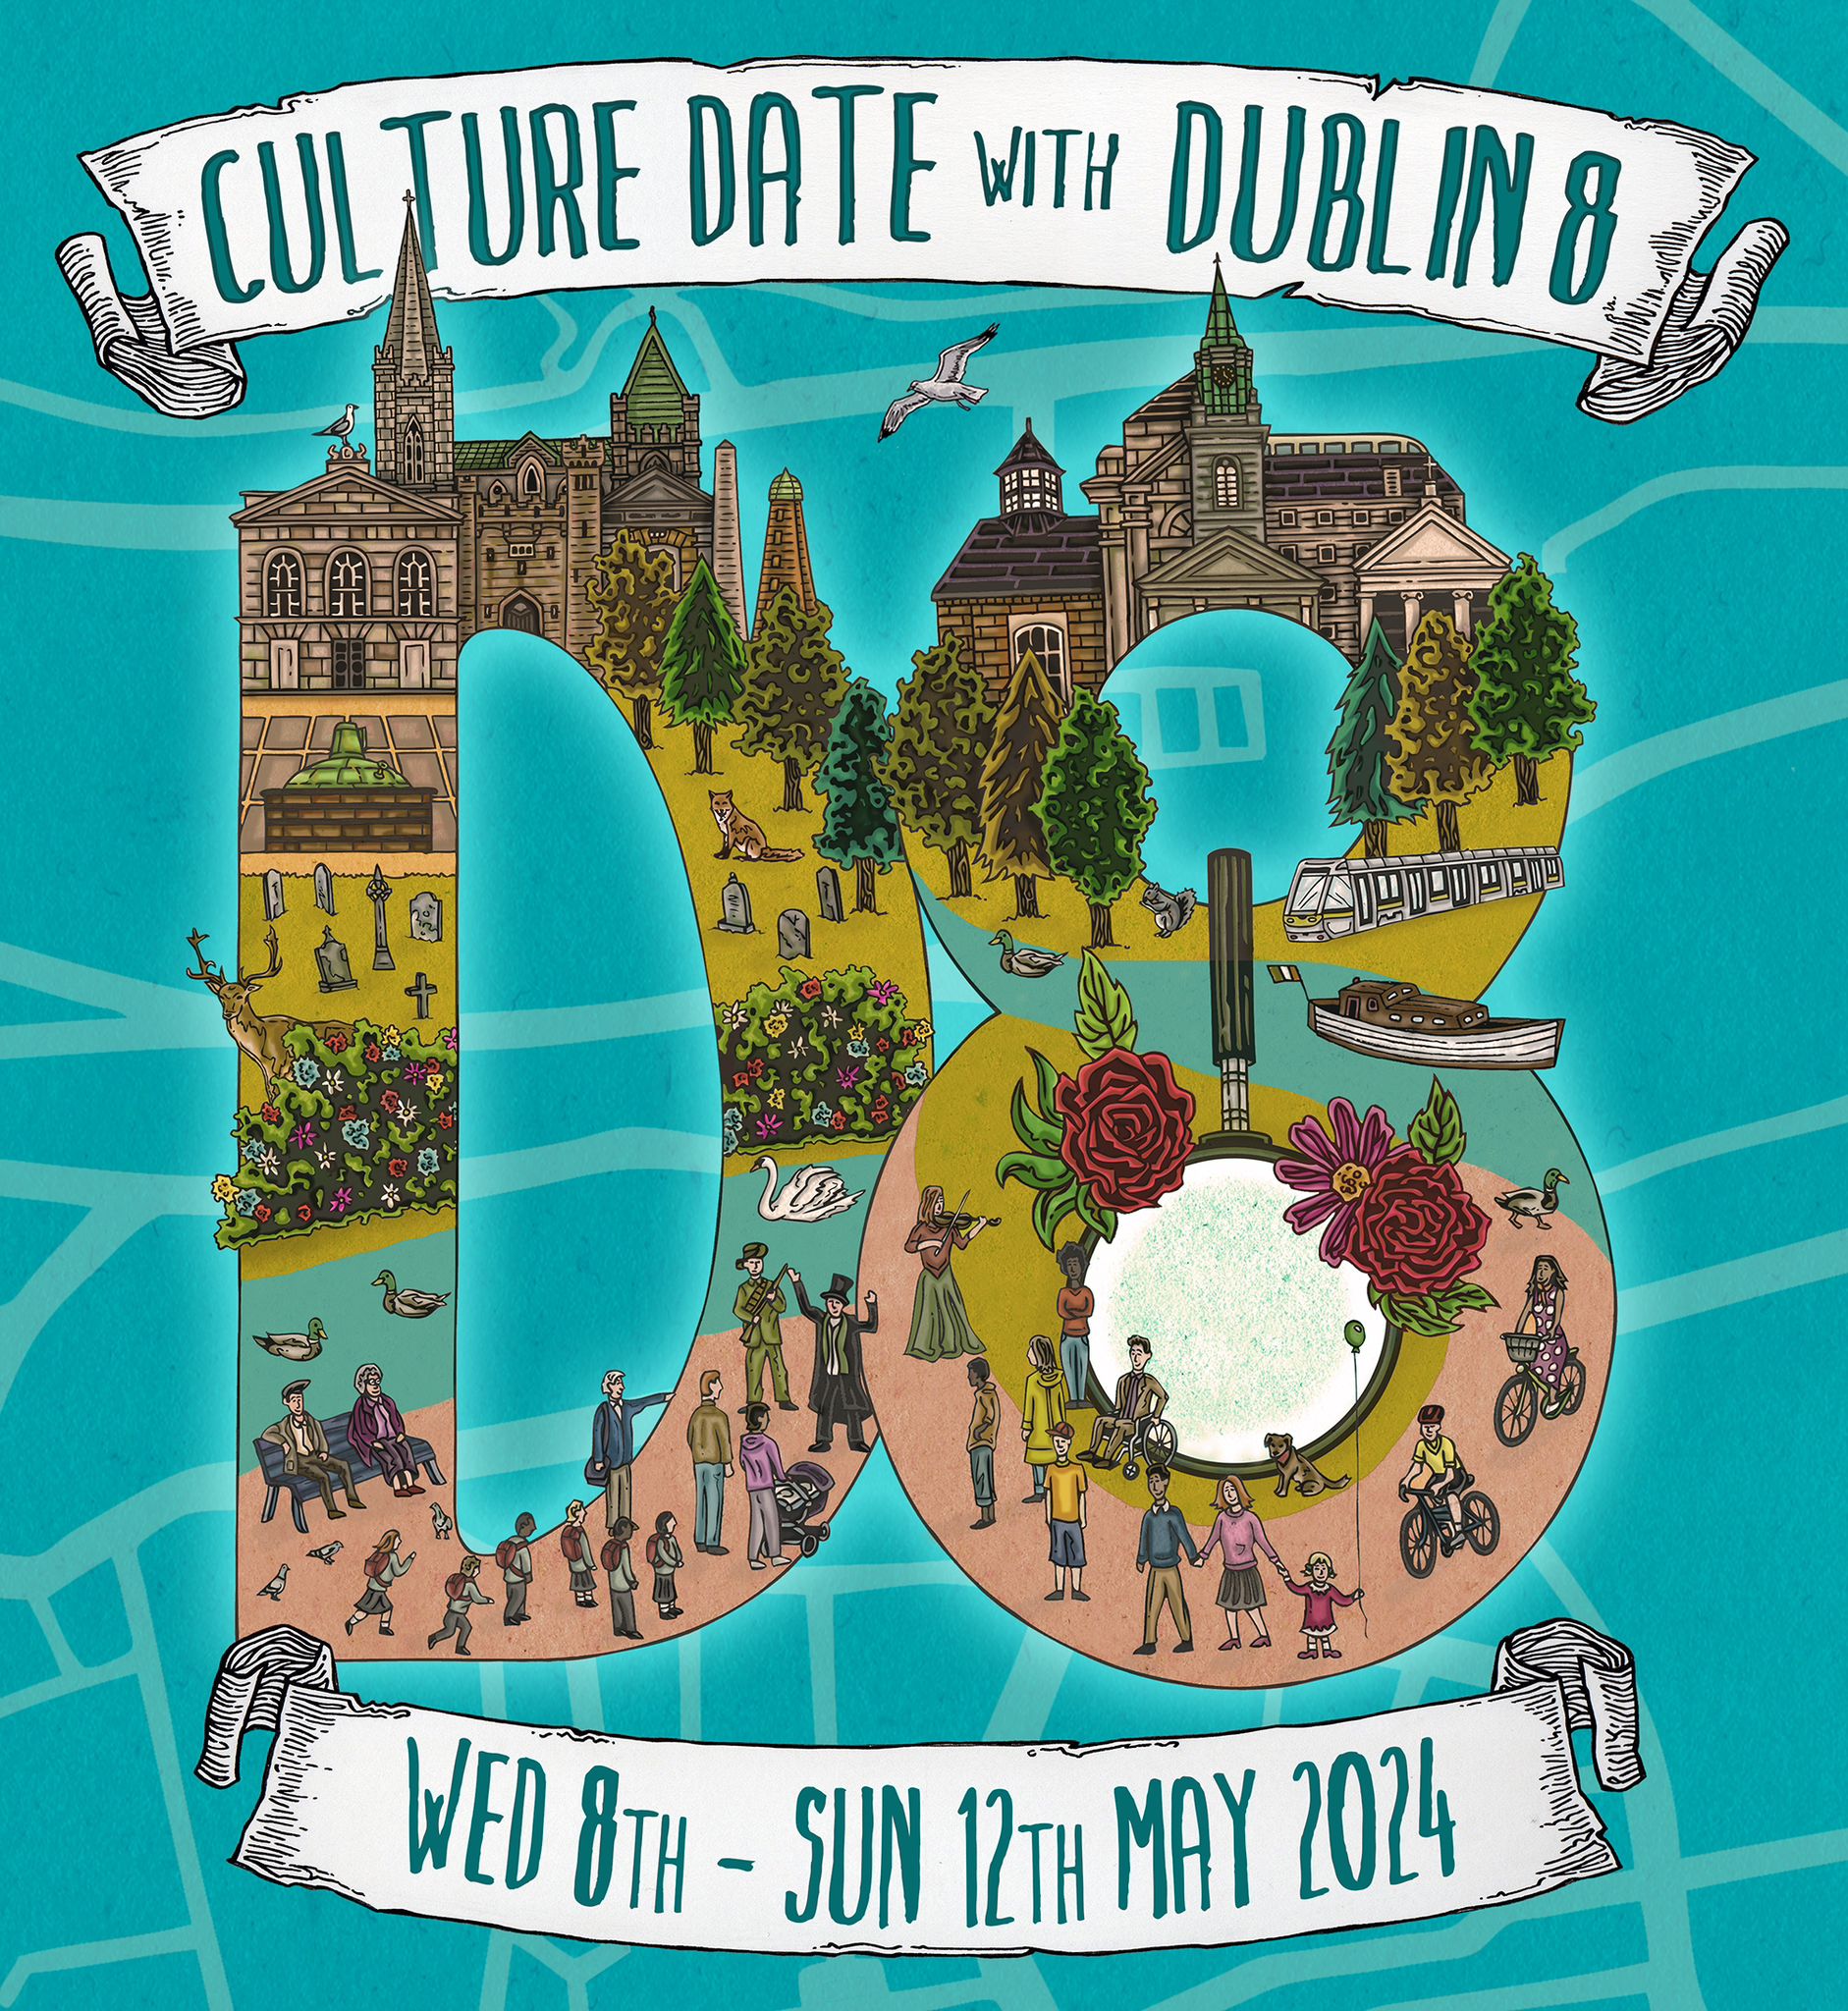 Poster for 'Culture Date with Dublin 8' featuring the letter D and Number 8 filled with scenery and buildings from Dublin 8 on a turquoise background.